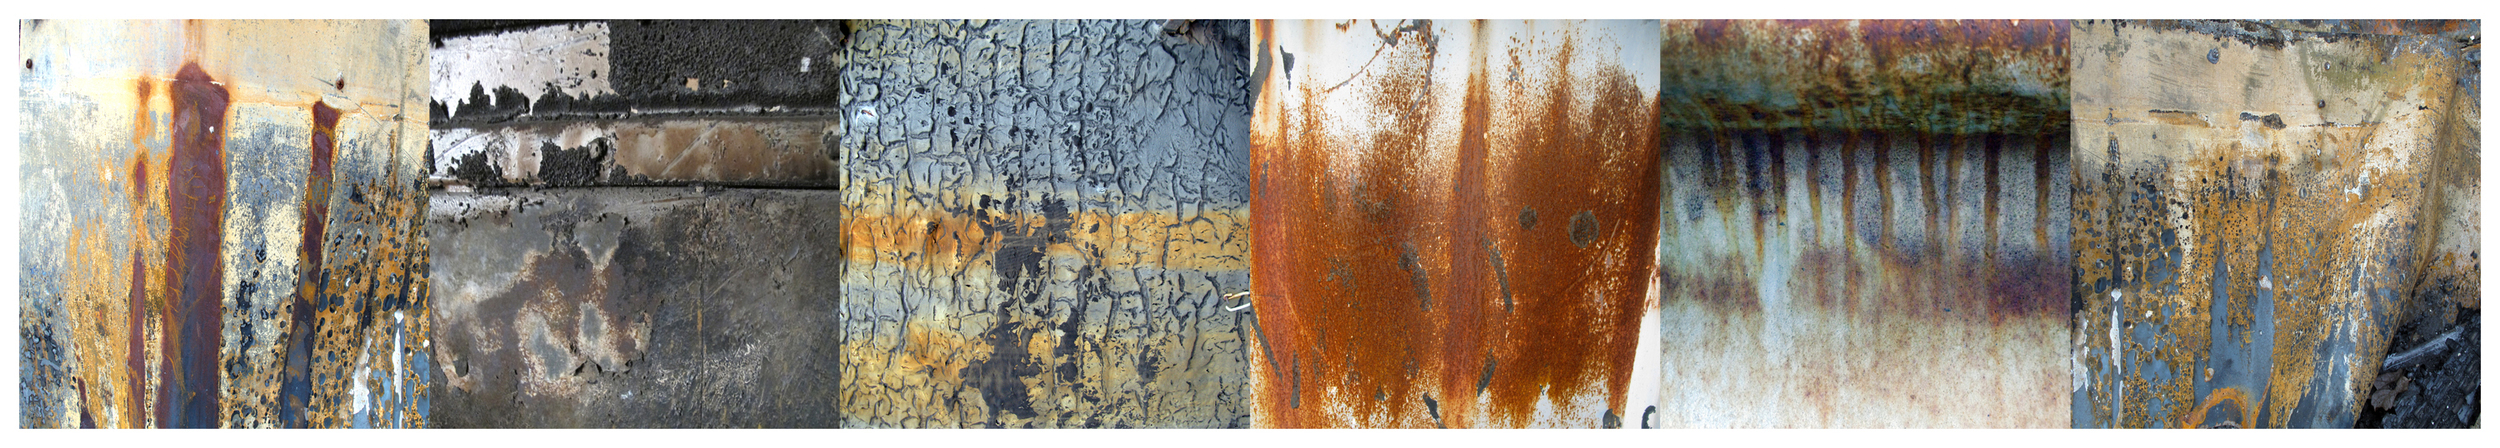  Rust and Smoke 2014  18" x 108” digital print  variable&nbsp;sizes available 